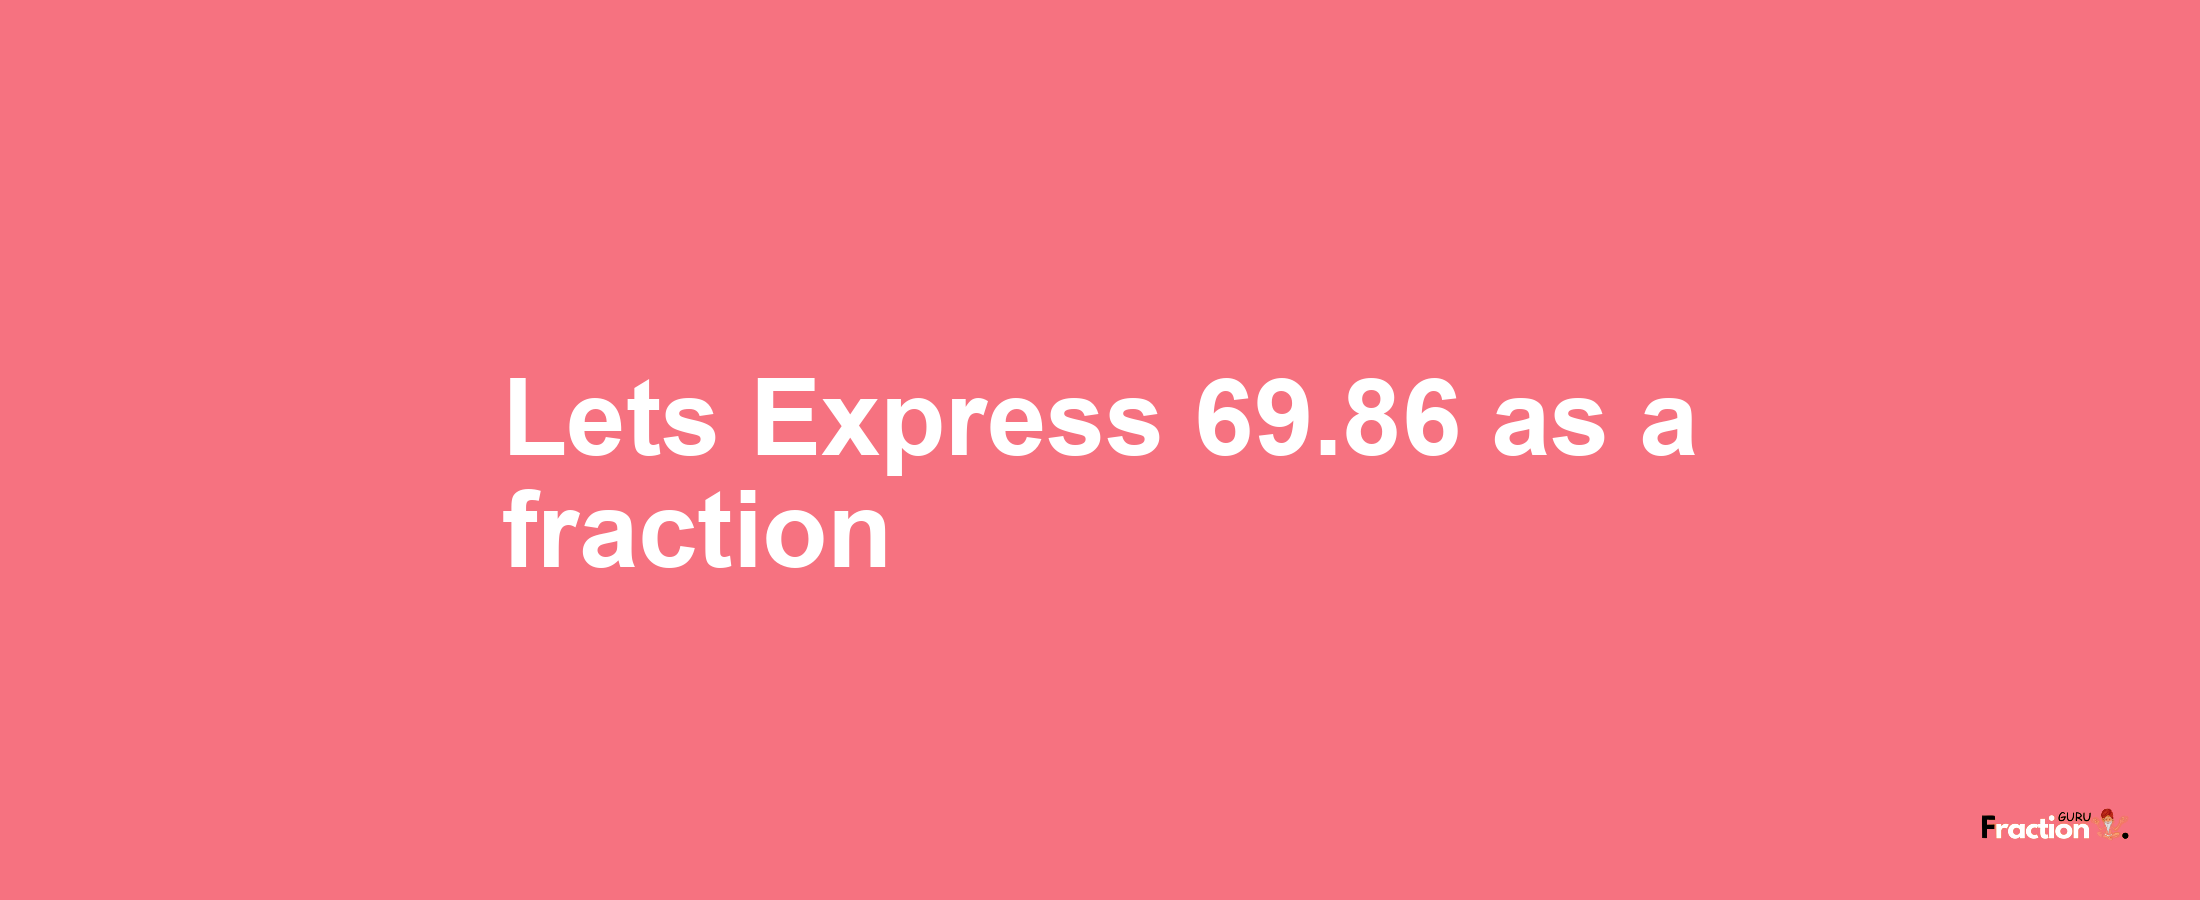 Lets Express 69.86 as afraction